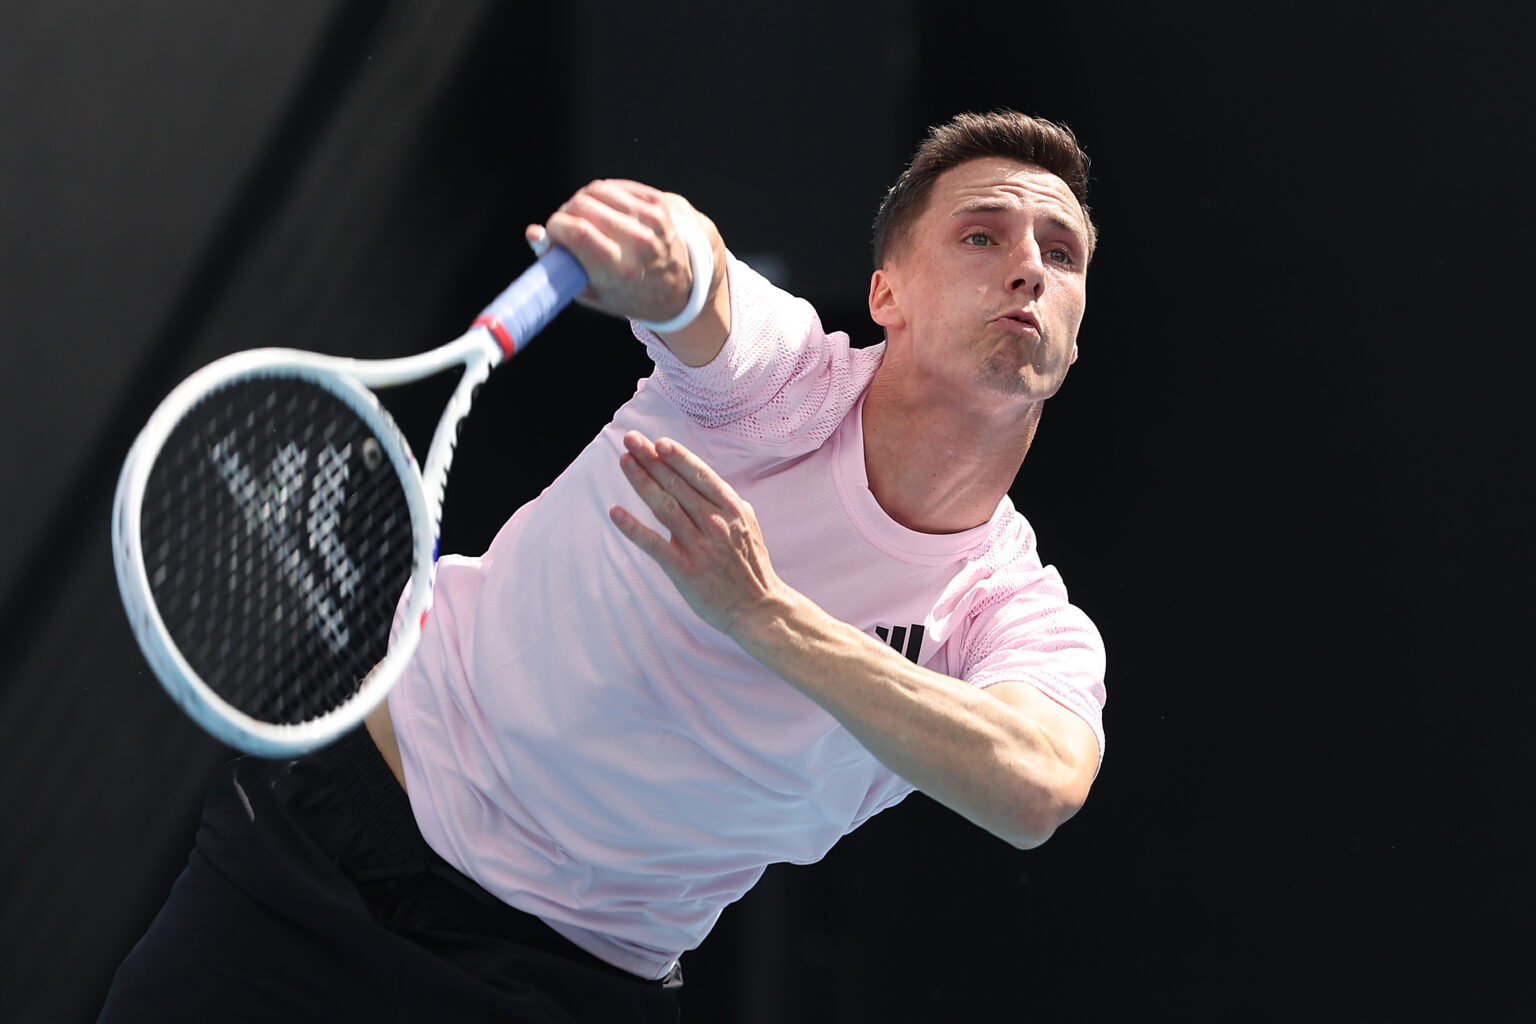 A blow for Joe Salisbury but Neal Skupski marches on in doubles at Australian Open